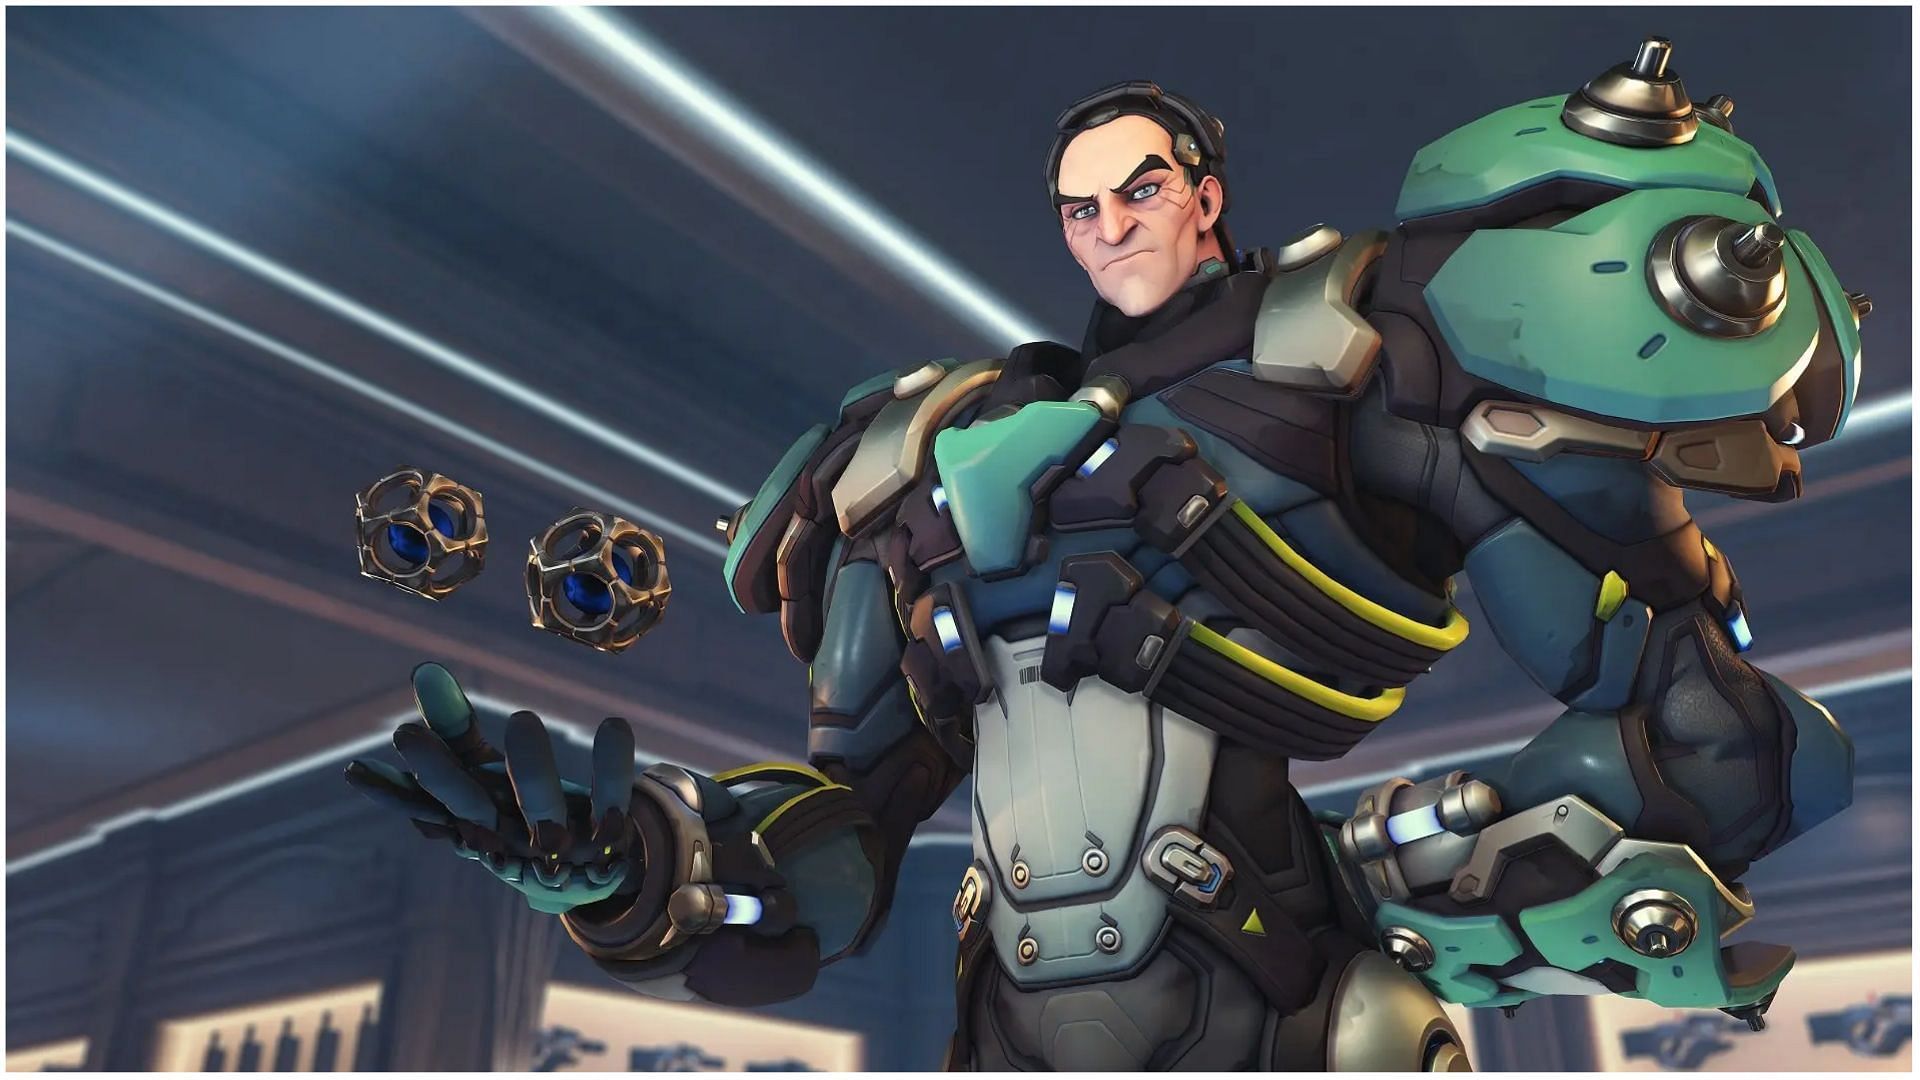 Sigma as seen in Overwatch 2 (Image via Activision Blizzard)